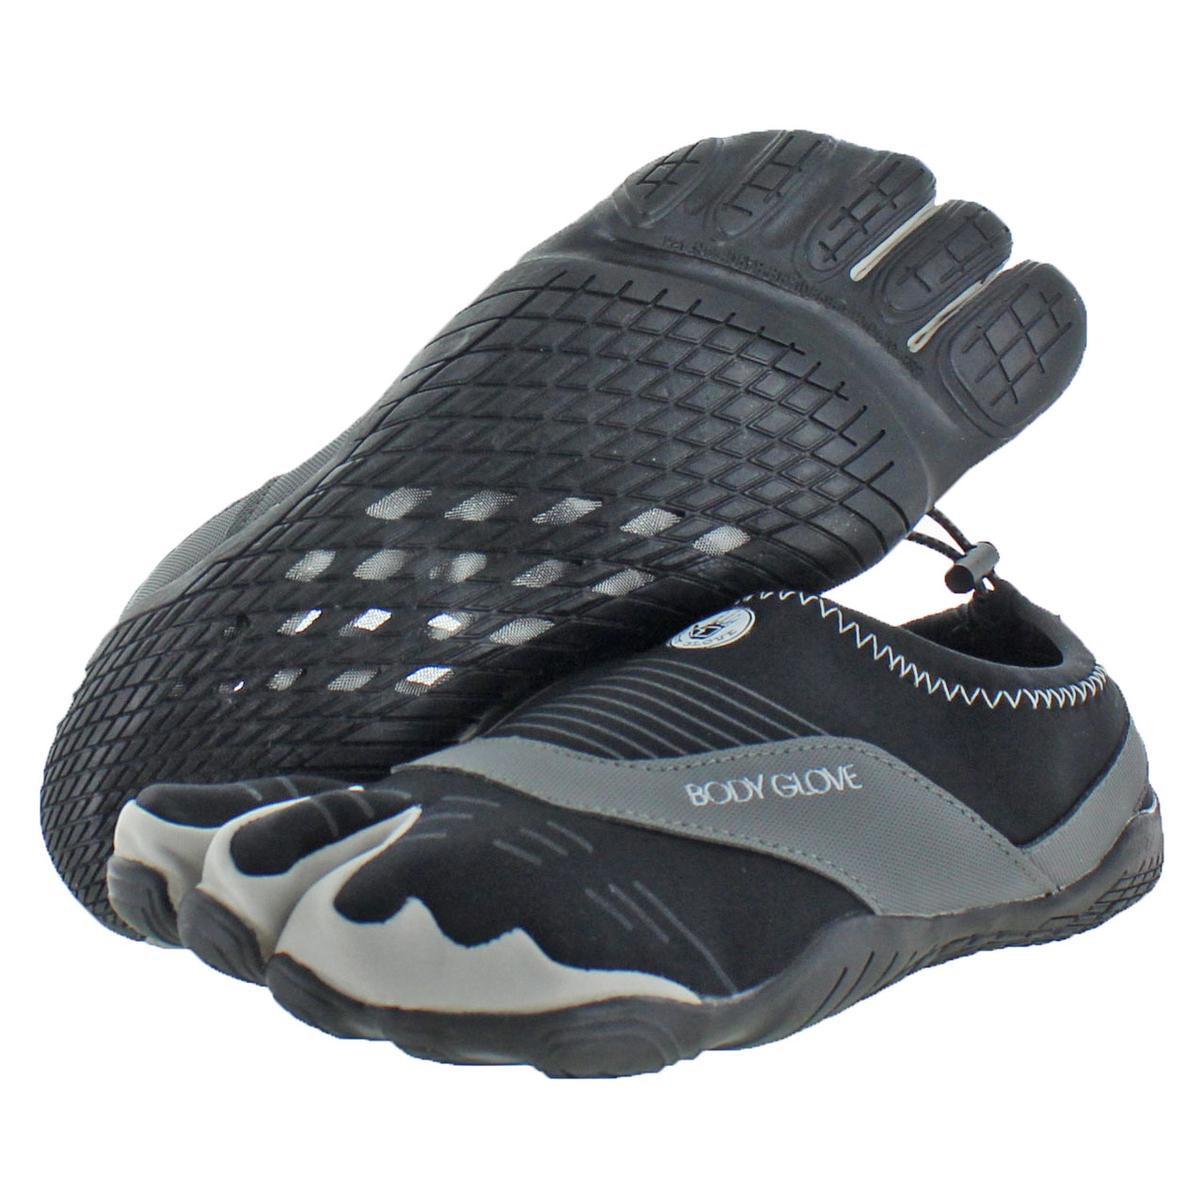 Body Glove Mens Barefoot Cinch Black Water Shoes Athletic 8 Medium (D ...